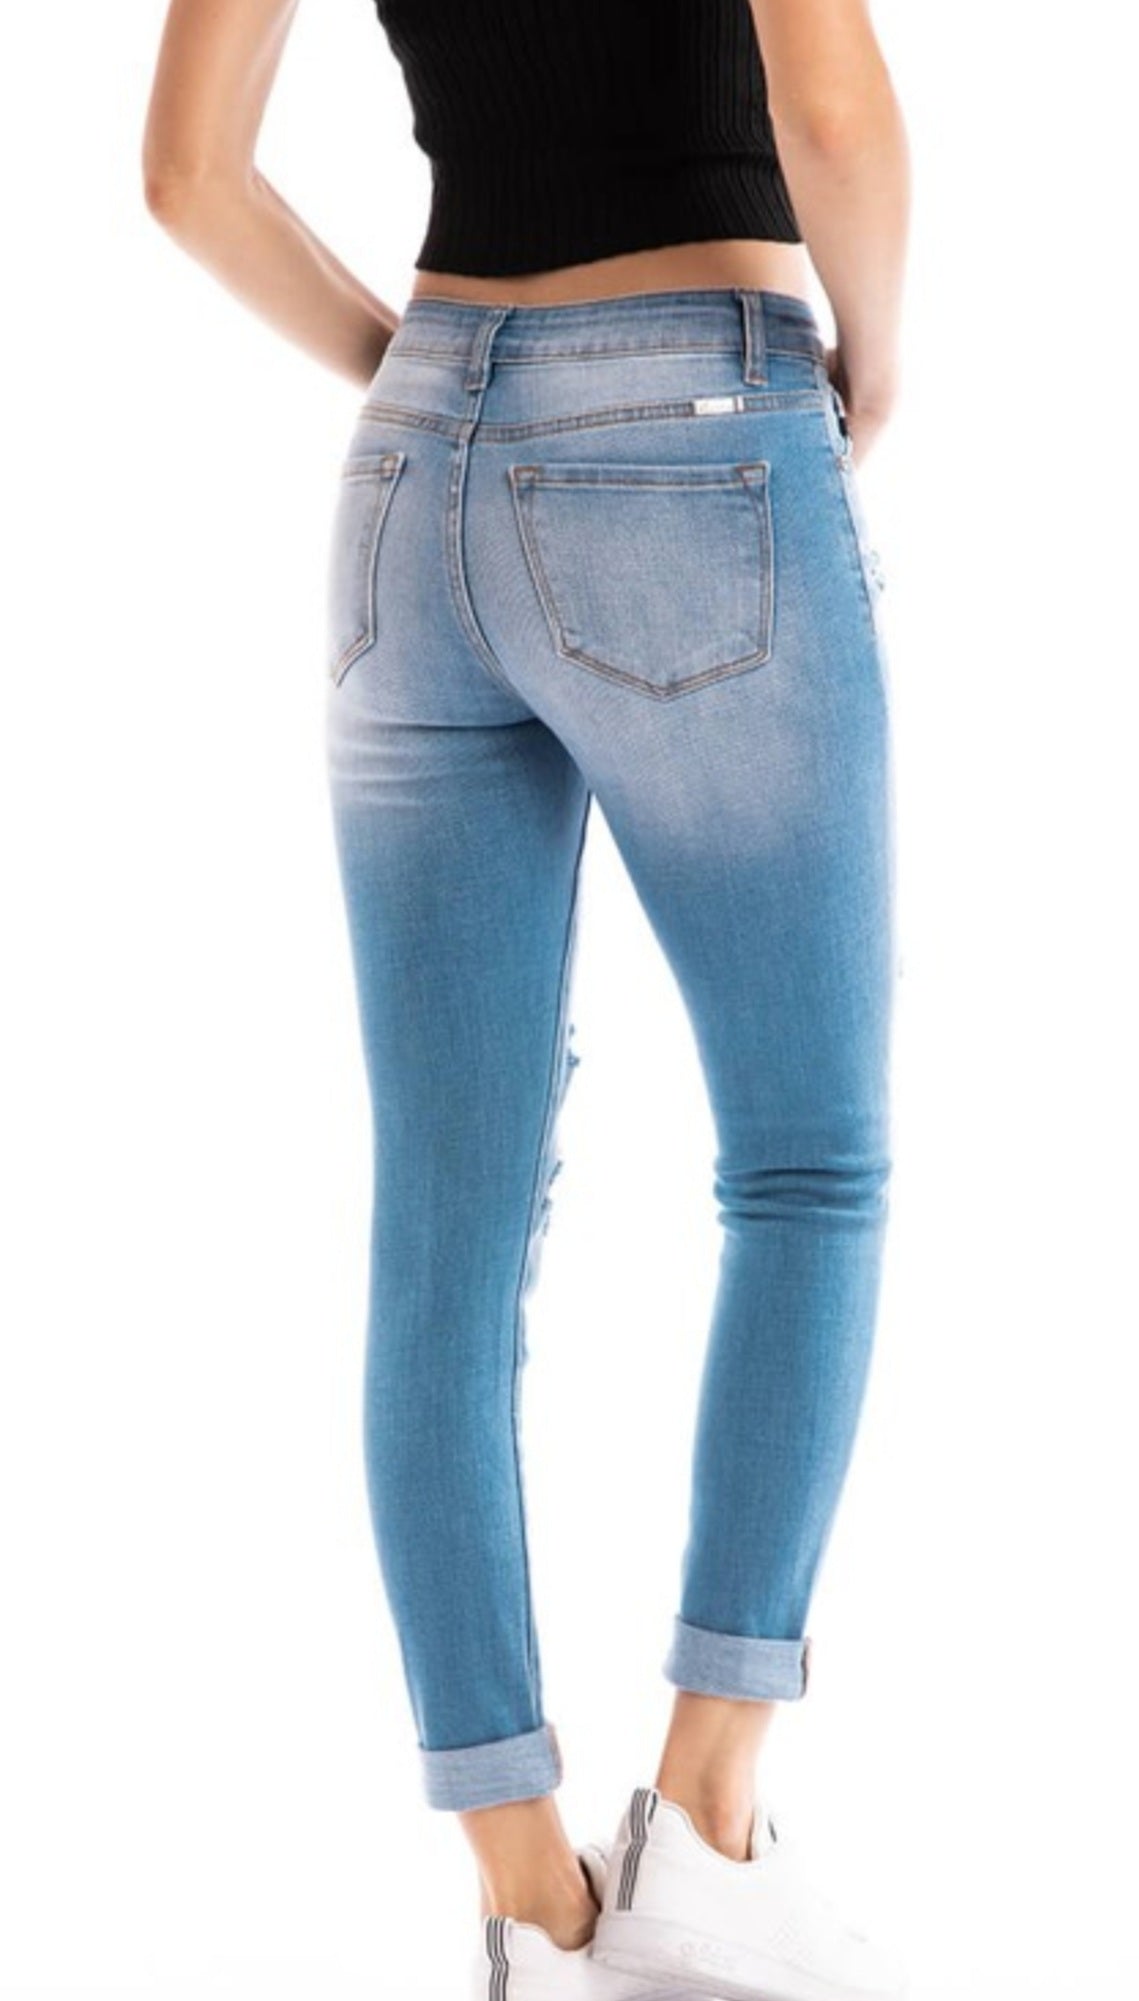 Kan Can Skinny Distressed Jeans